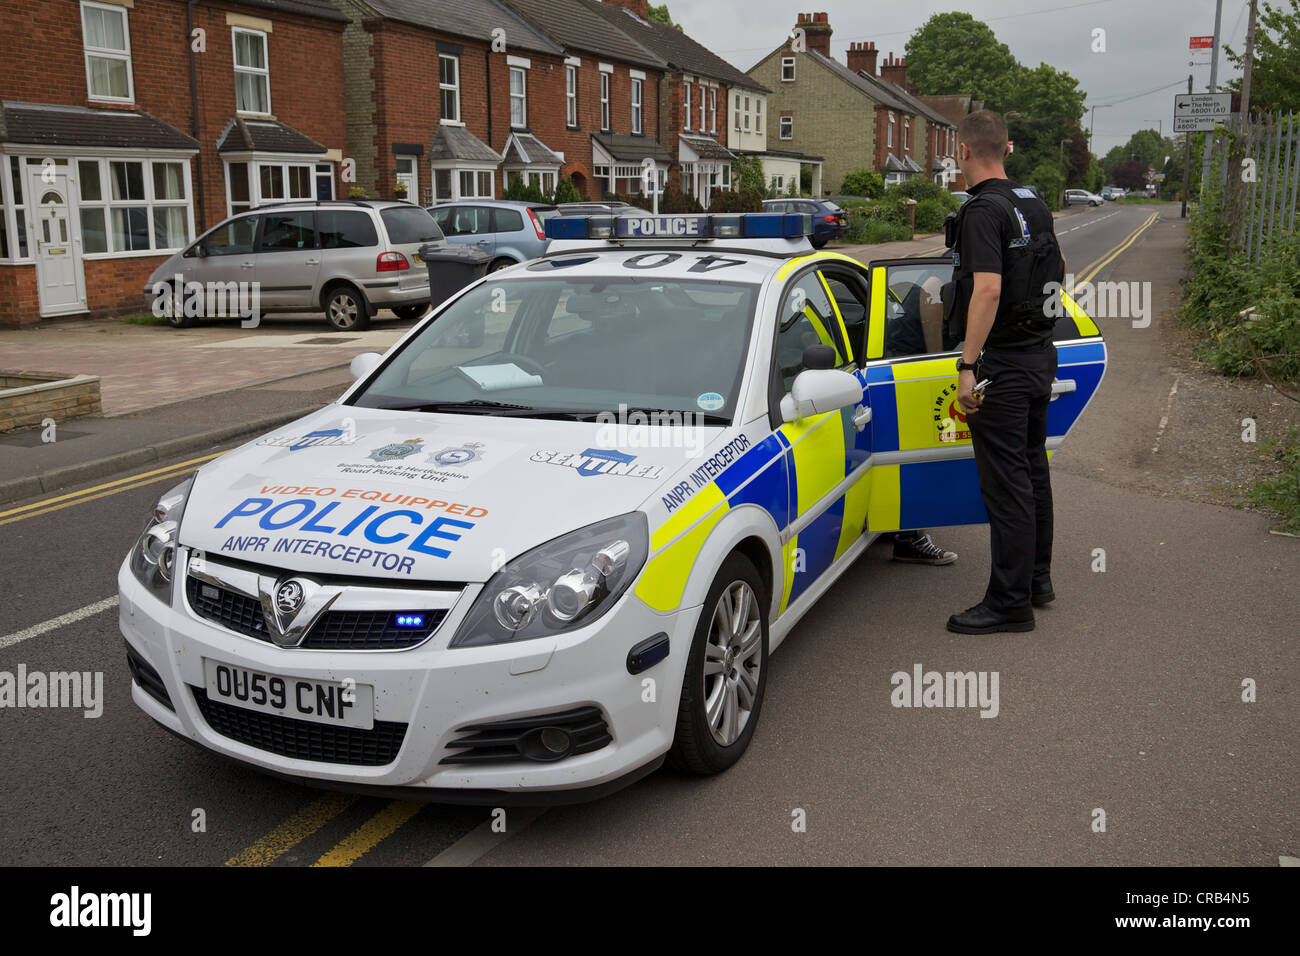 A police car with automatic number plate recognition equipment (ANPR) England Stock Photo